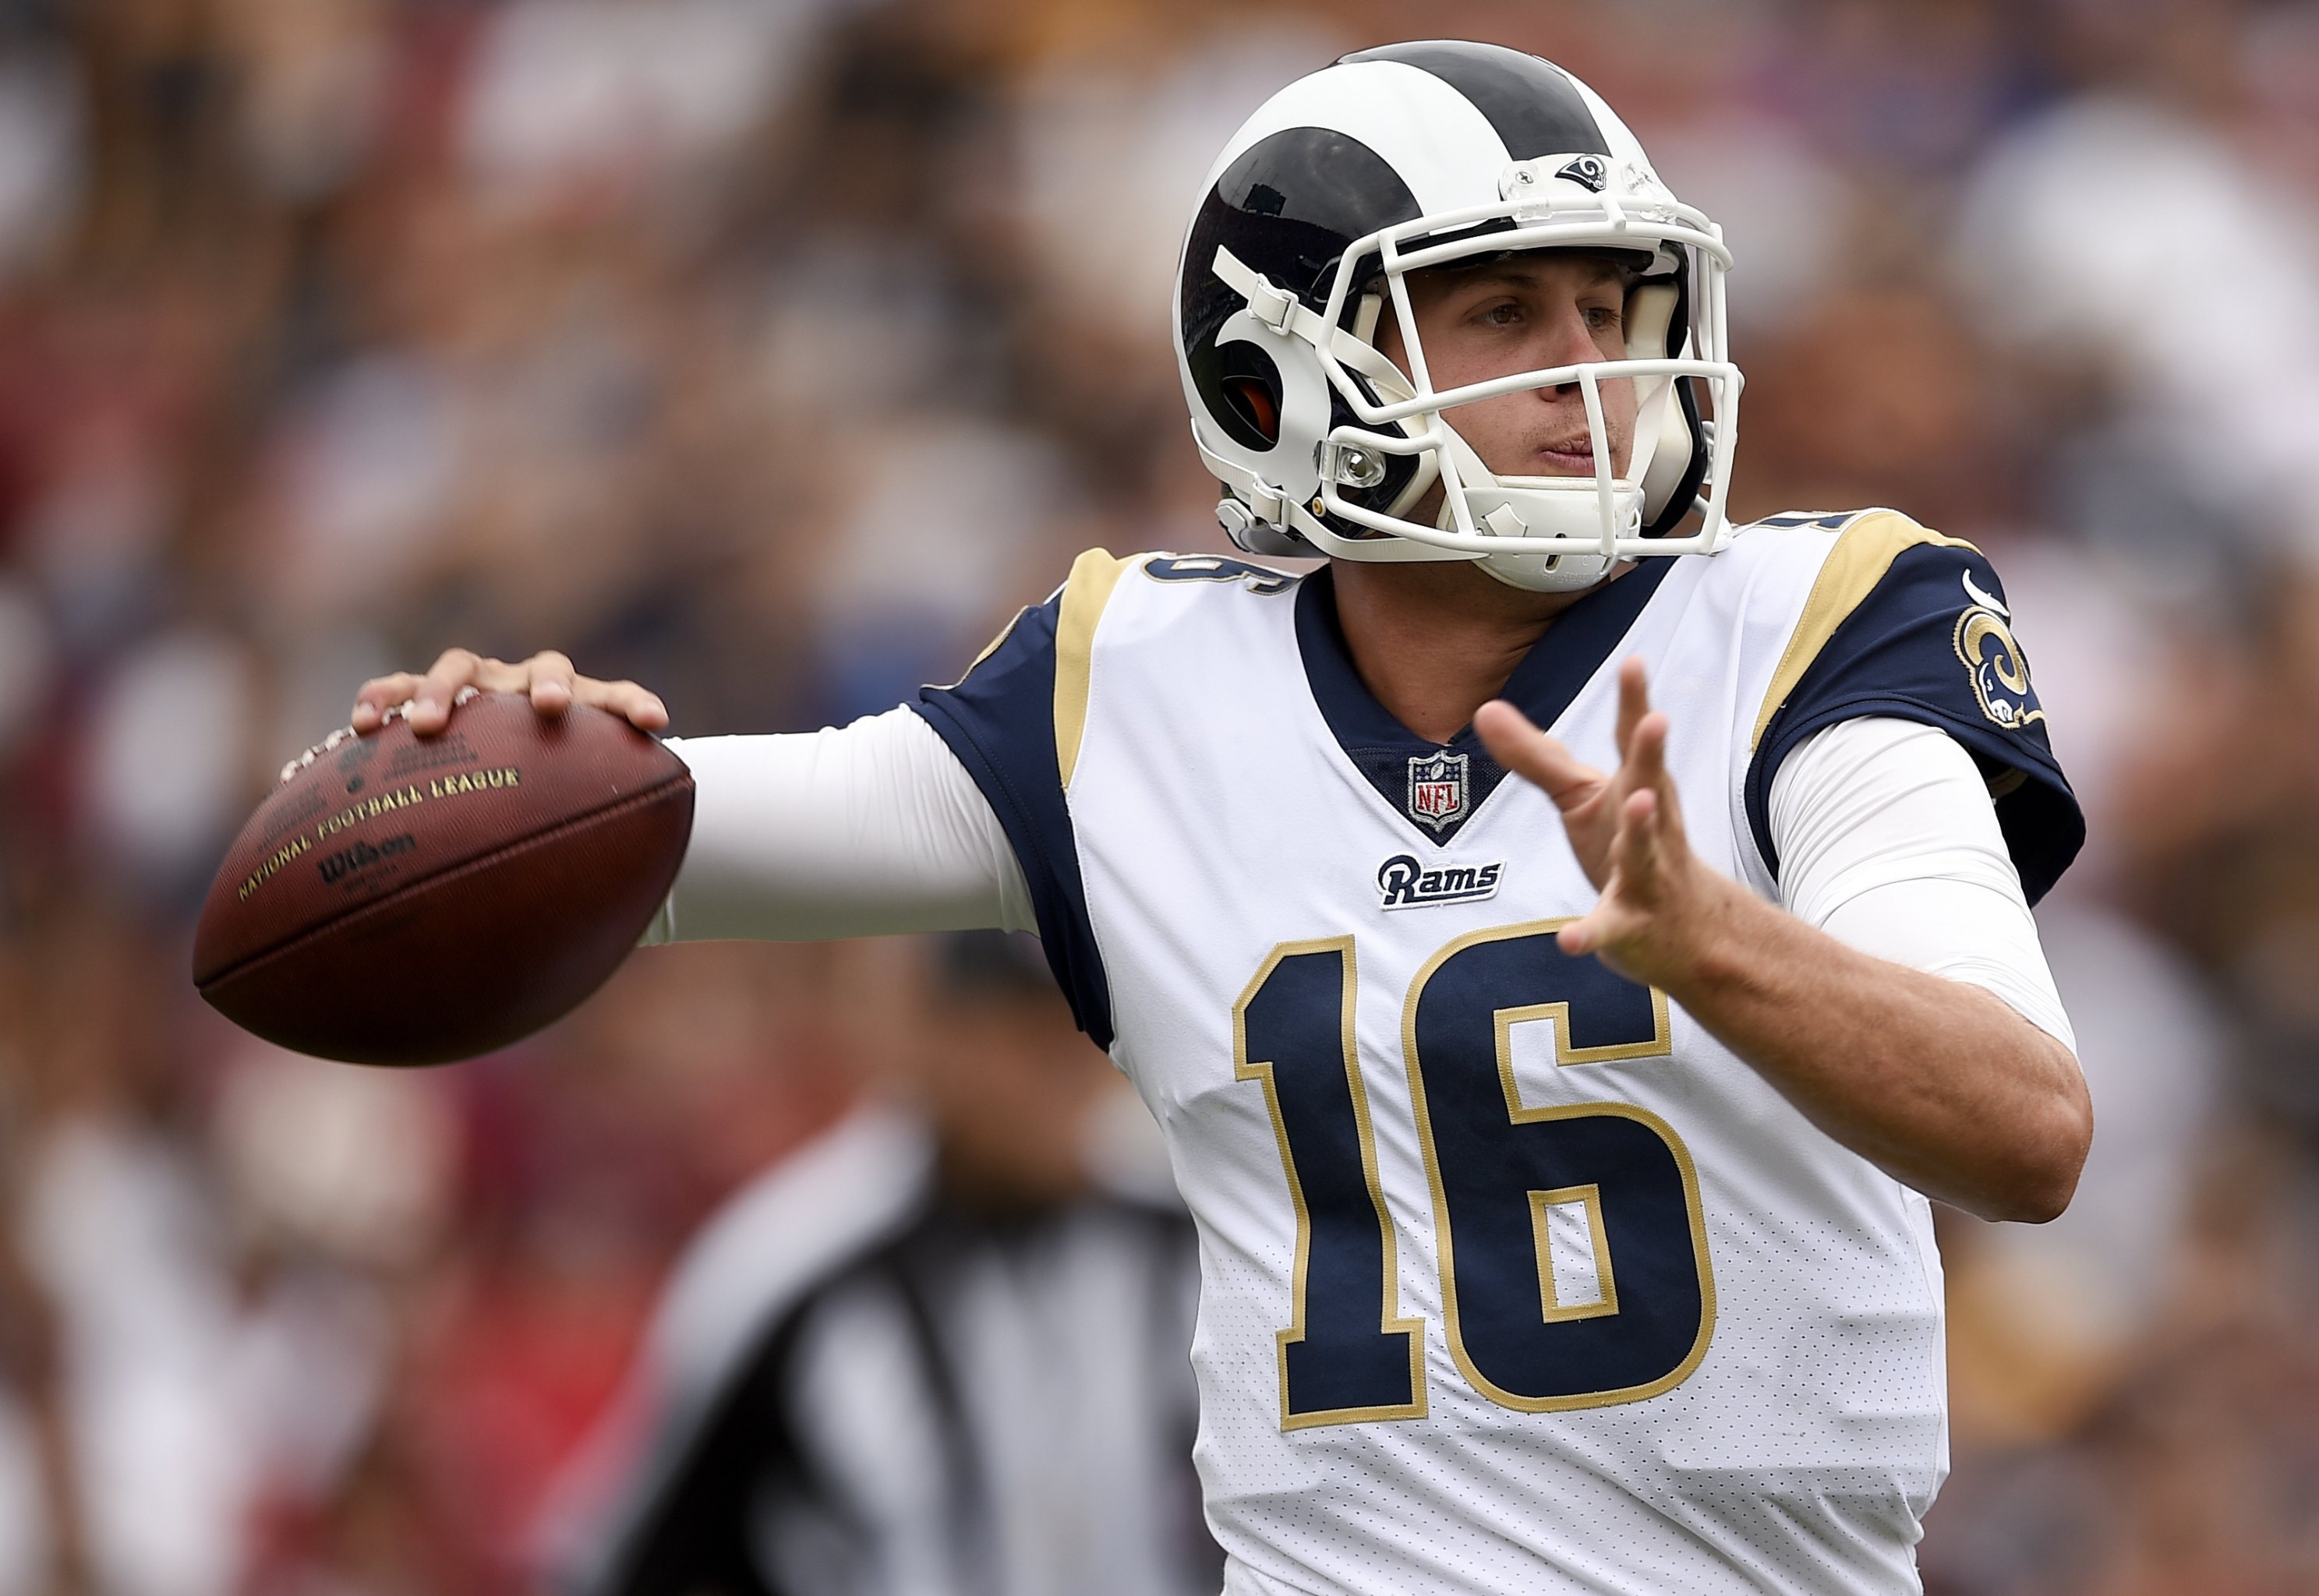 Rams vs. 49ers final score, results: San Francisco cruises to victory after  stout defensive display